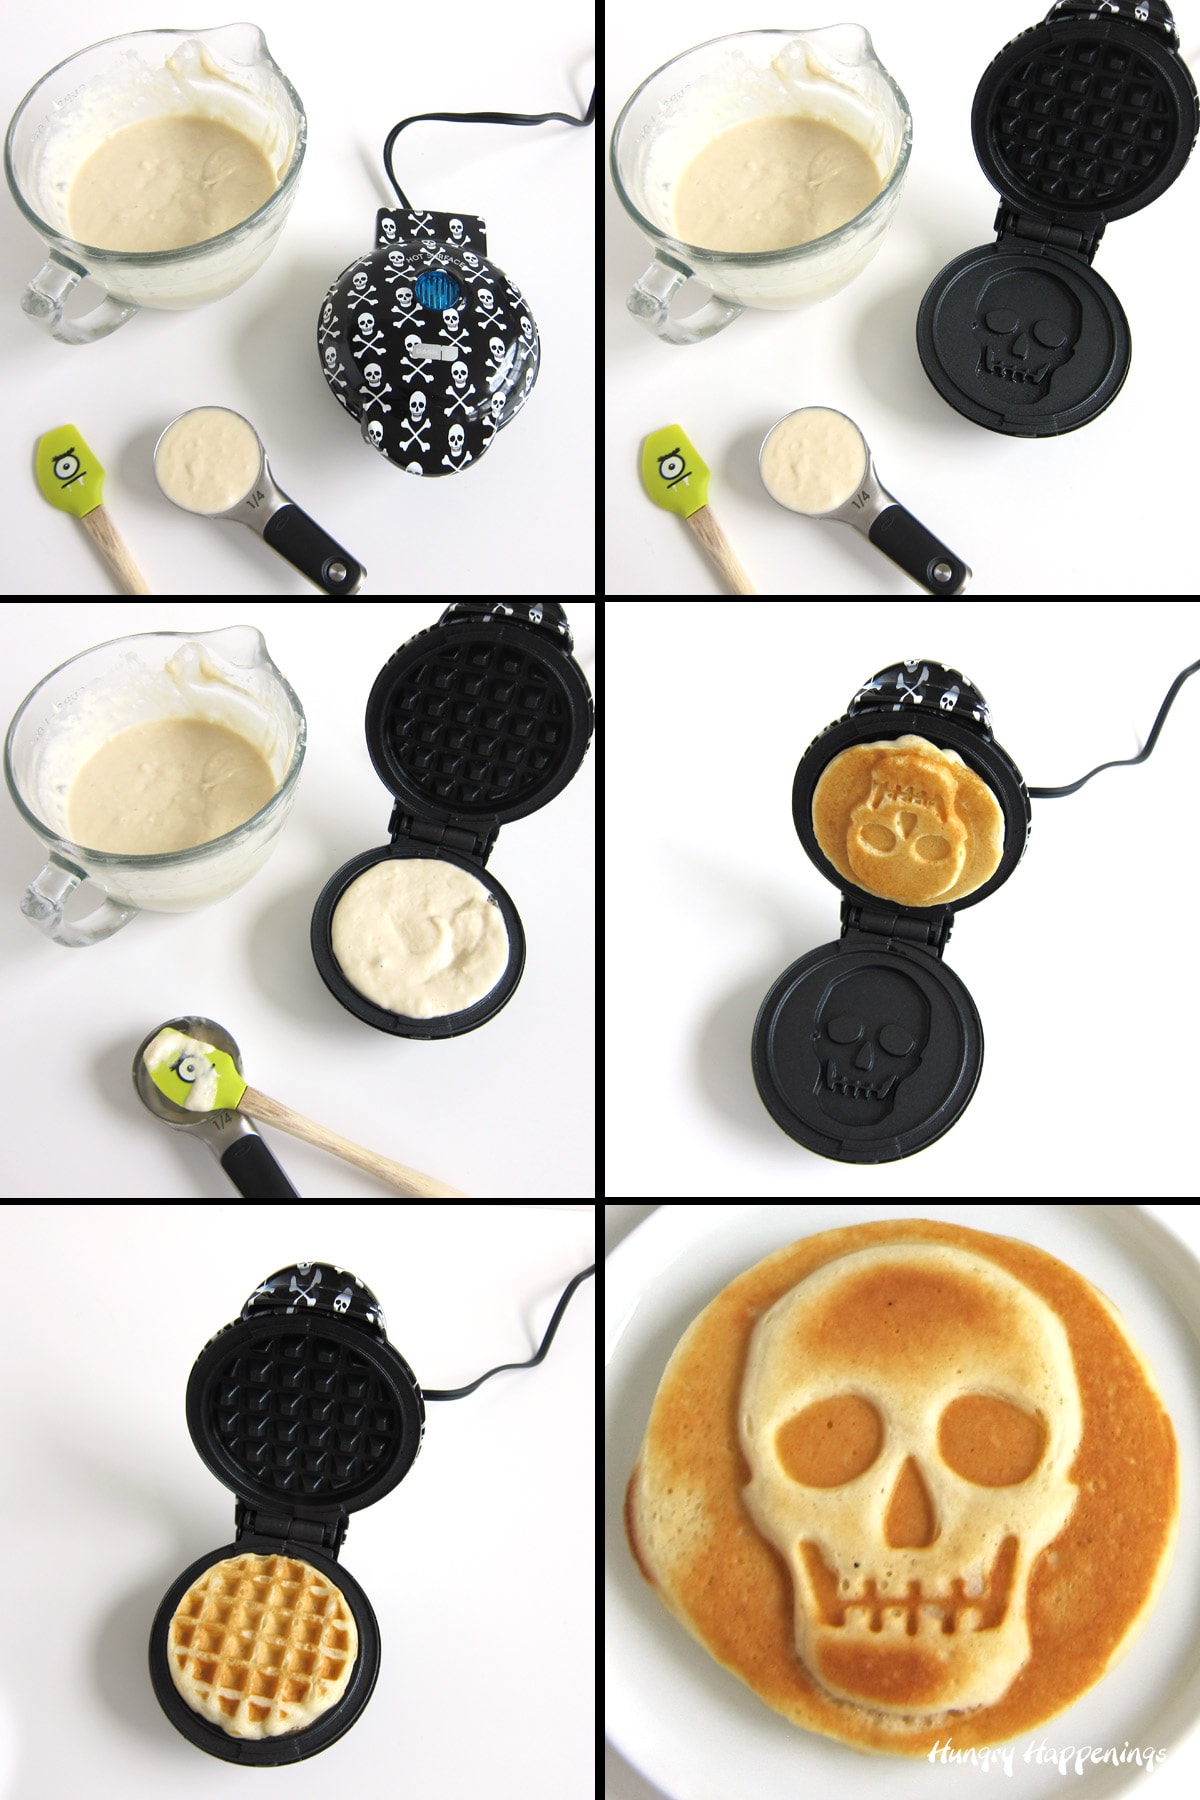 Fill a mini skull waffle maker with waffle batter to create skull waffles for Halloween.